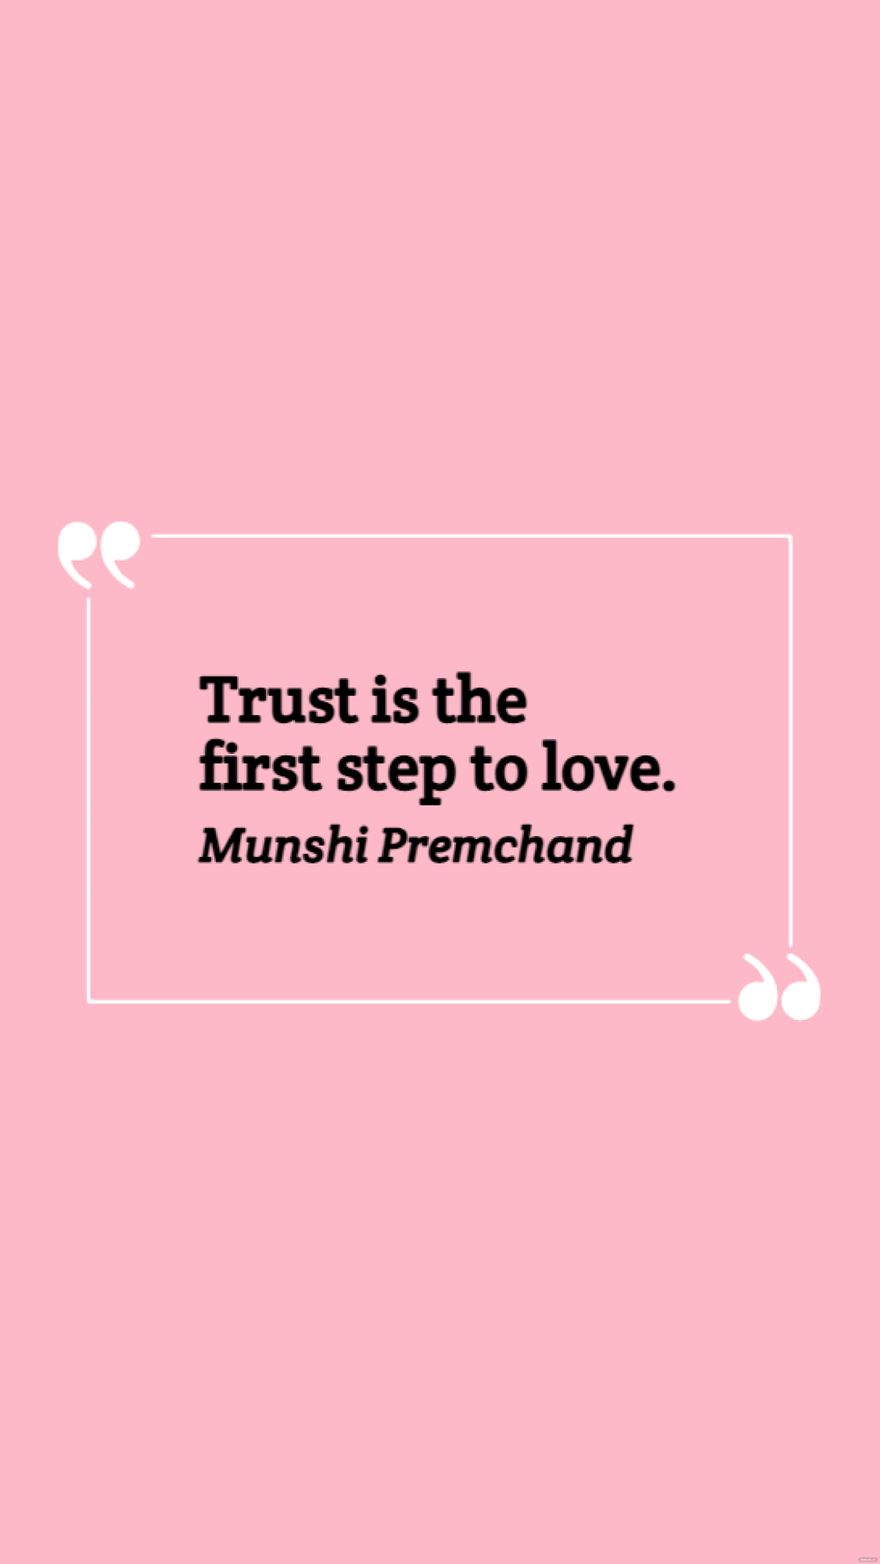 Free Munshi Premchand - Trust is the first step to love. in JPG